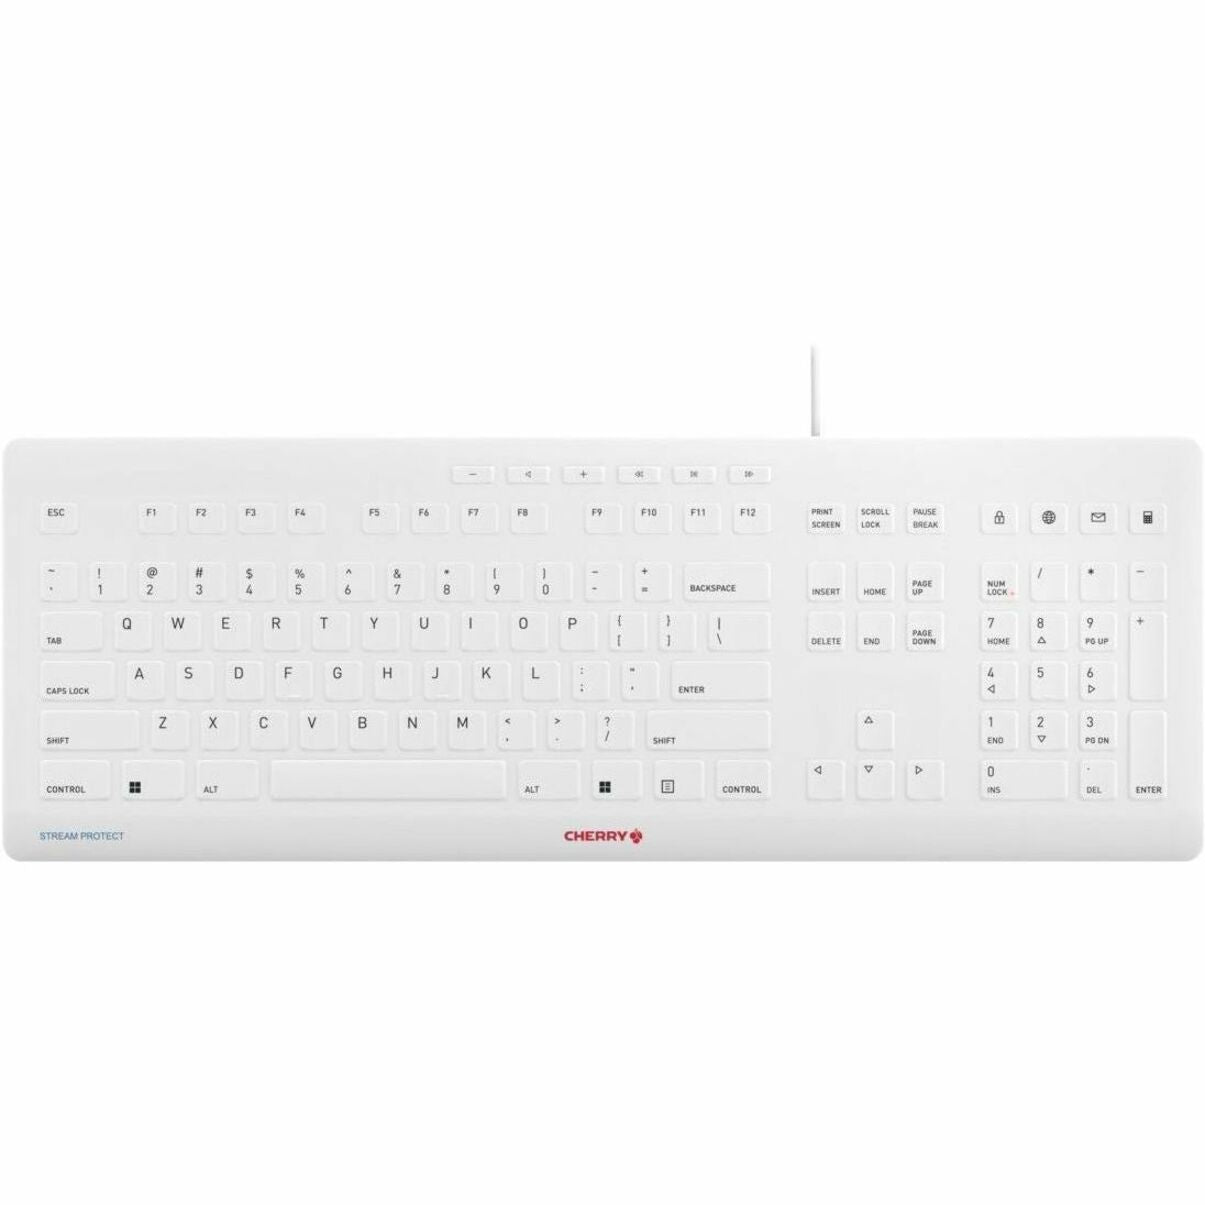 CHERRY JK-8502US-0 STREAM PROTECT Keyboard, USB Cable, White, Water Resistant, Slim, LED Indicator